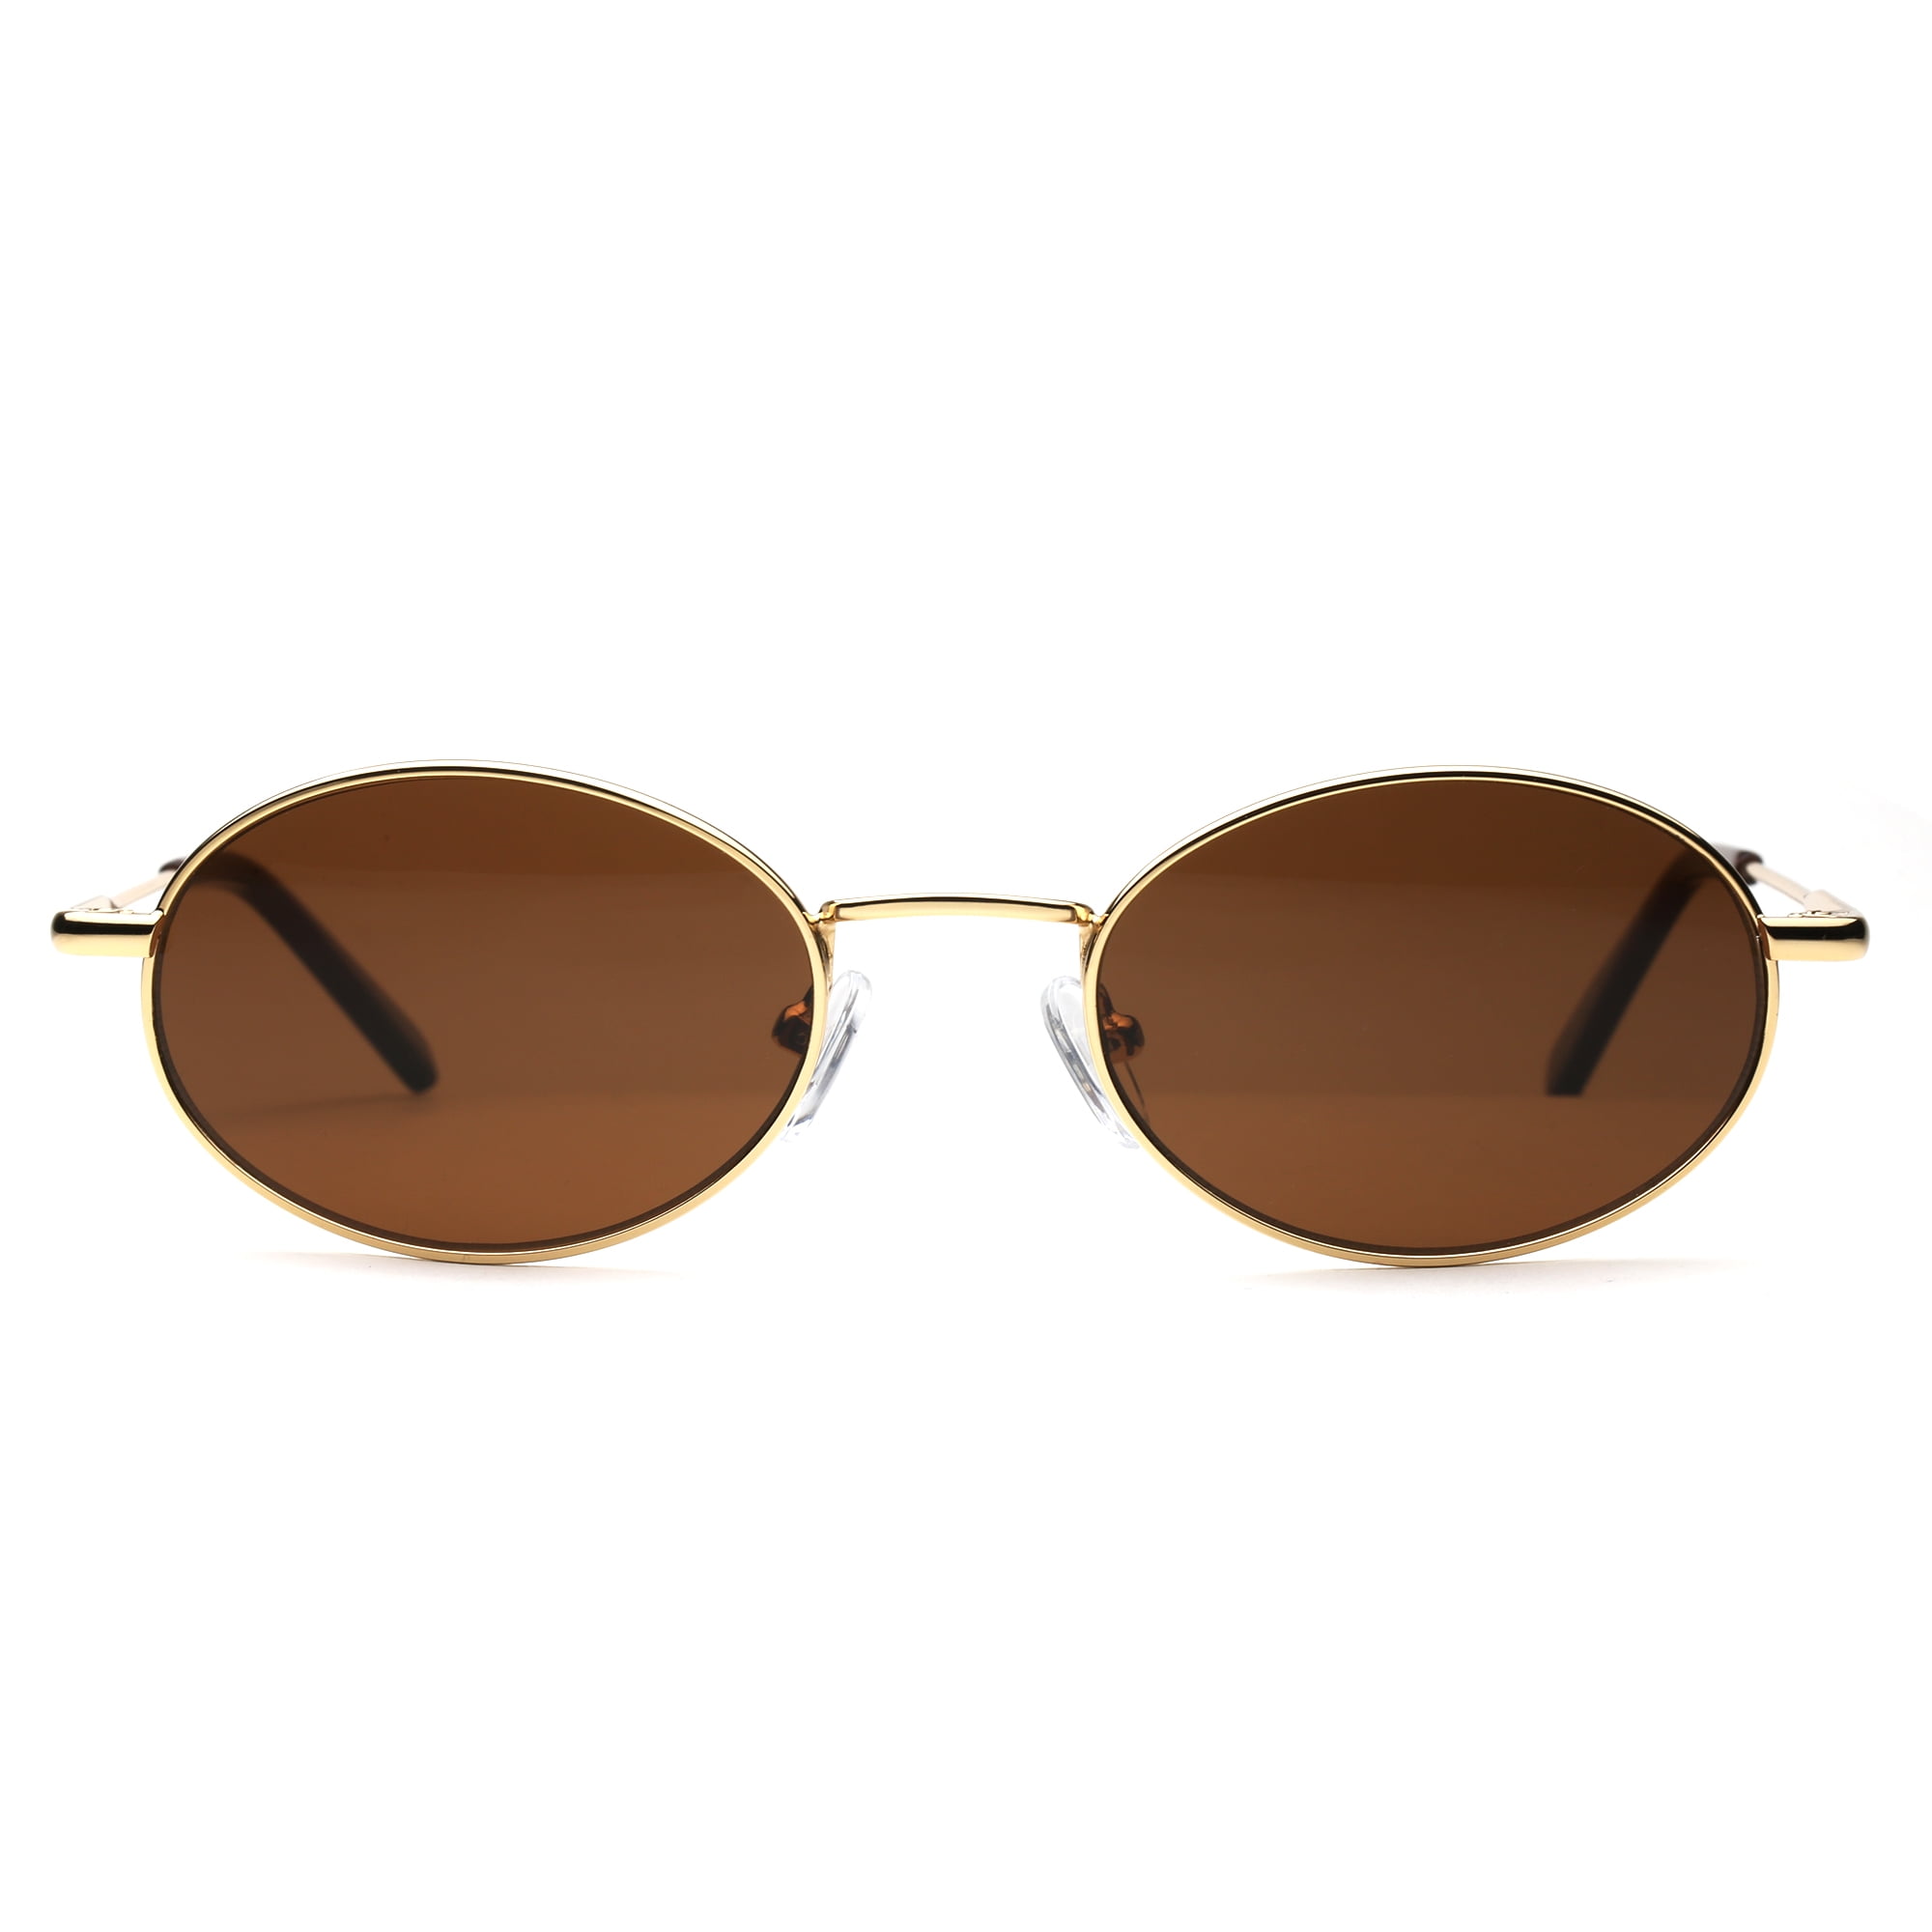 Small Gold Metal Oval Sunglasses, UV Protection 50-20-140 mm 